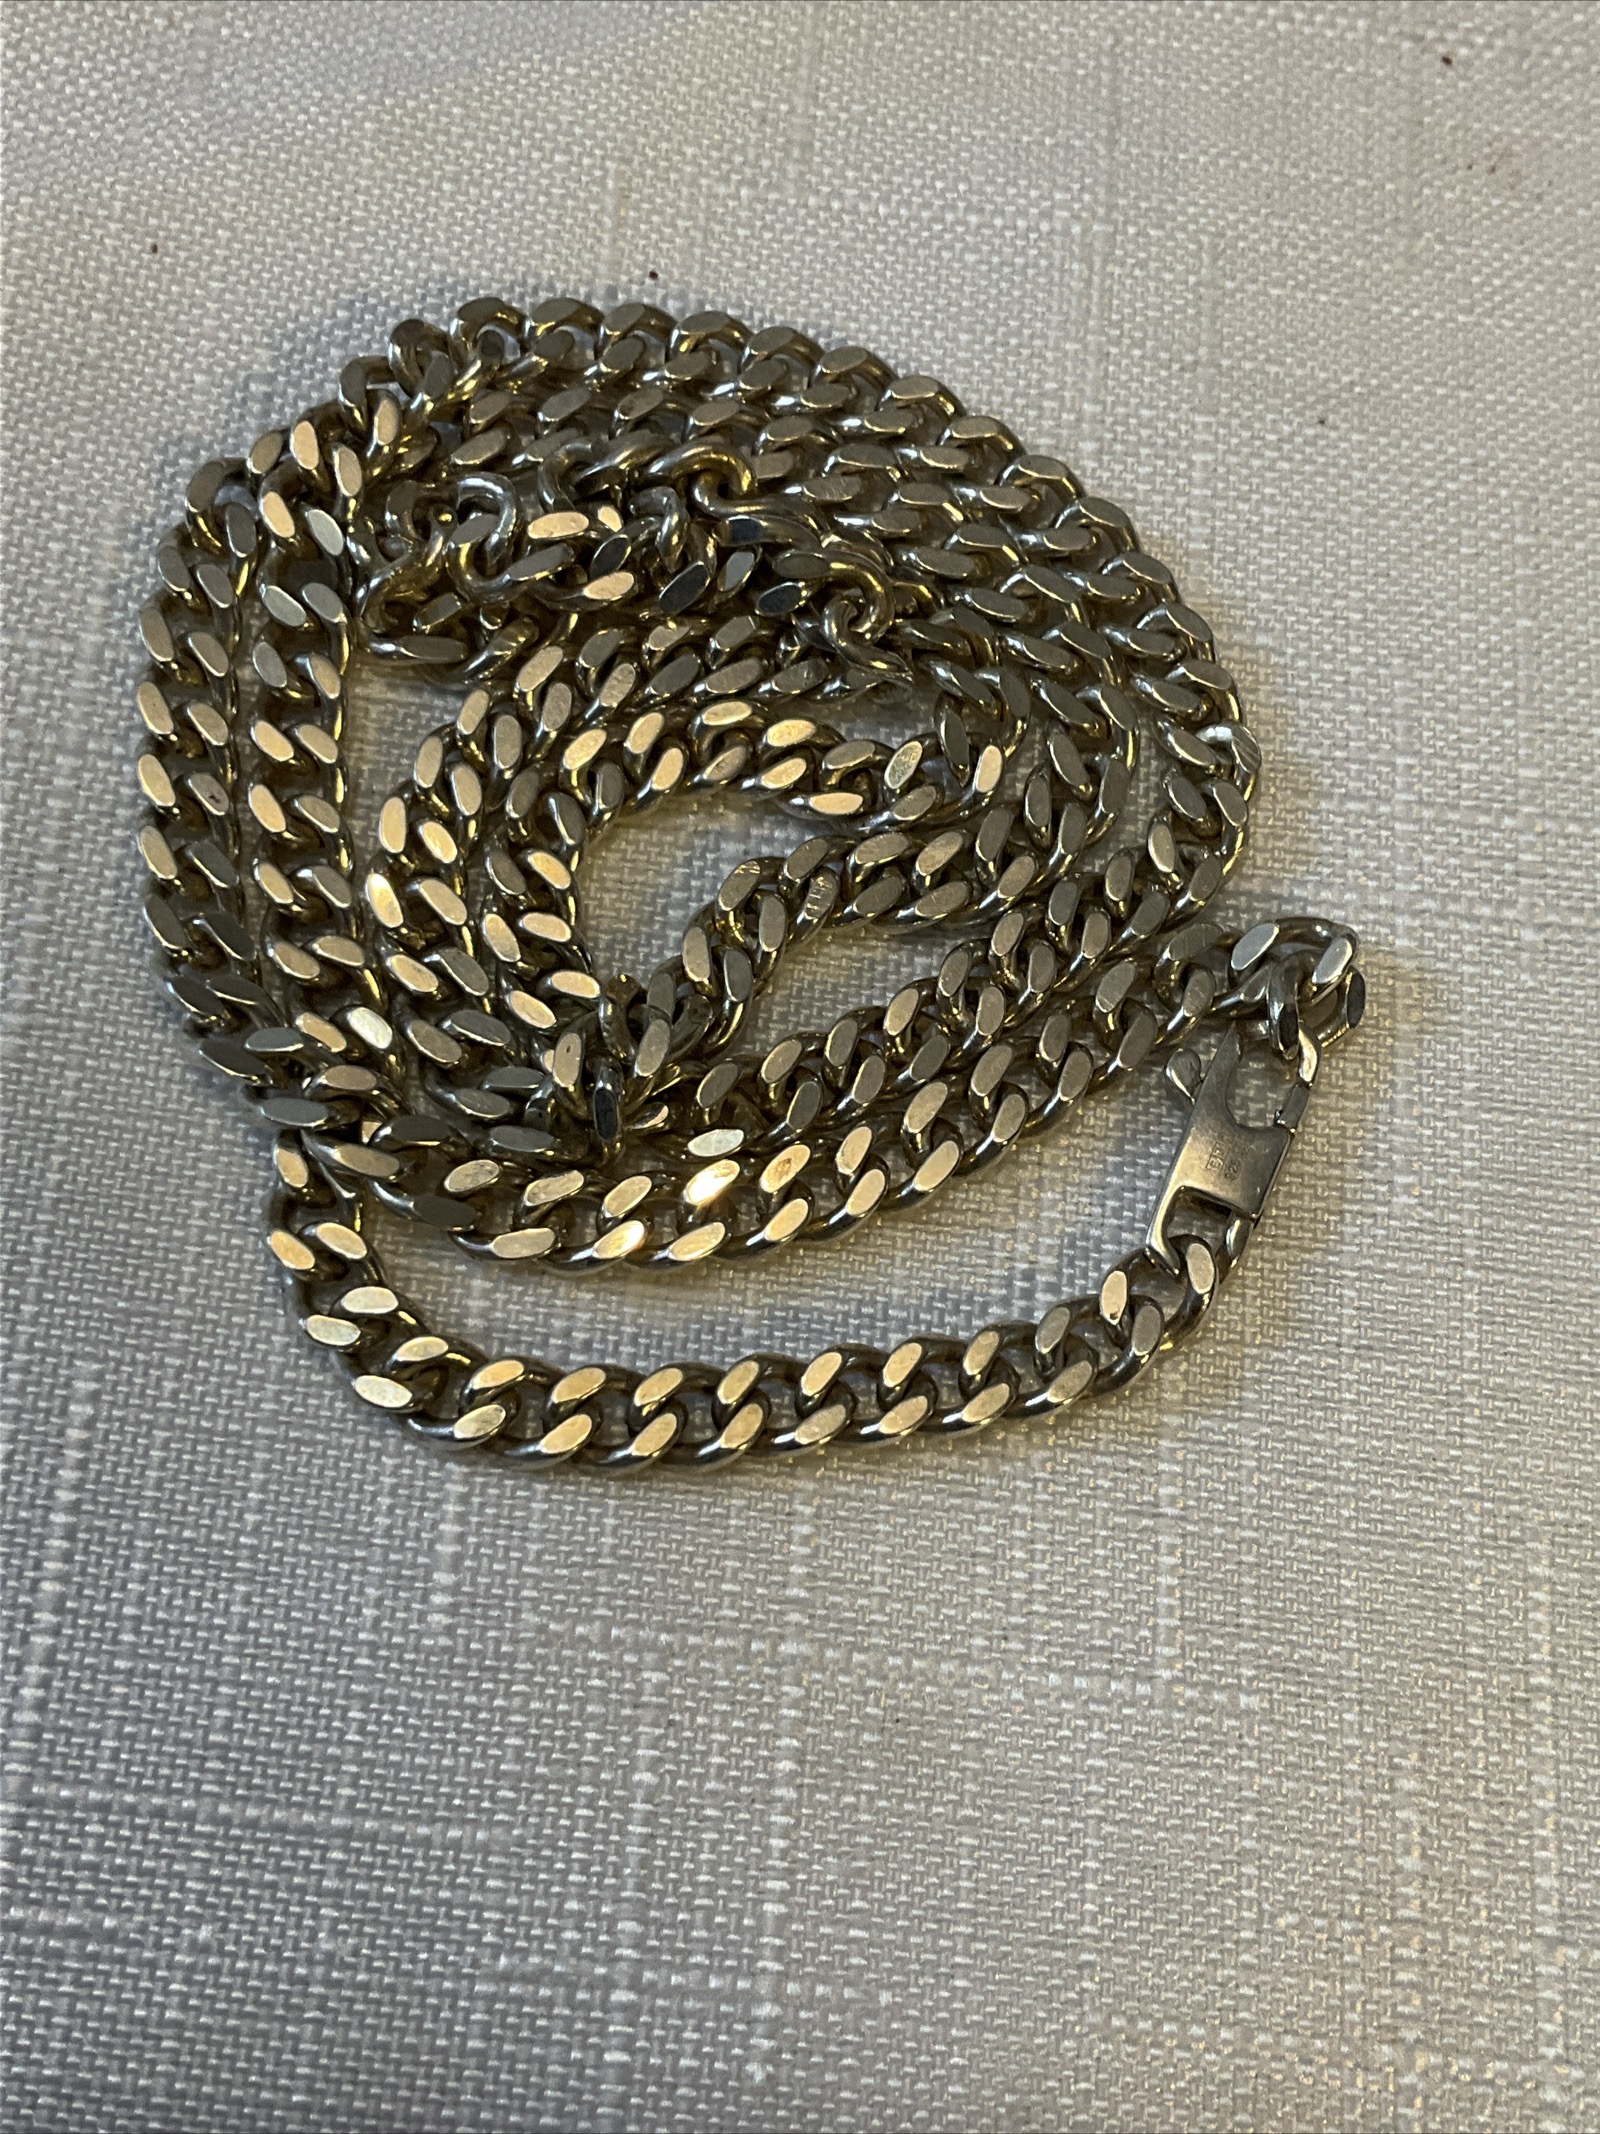 Vintage Solid 925 Silver Miami Cuban Link Chain Necklace 22” 4mm W40g - Image 2 of 2